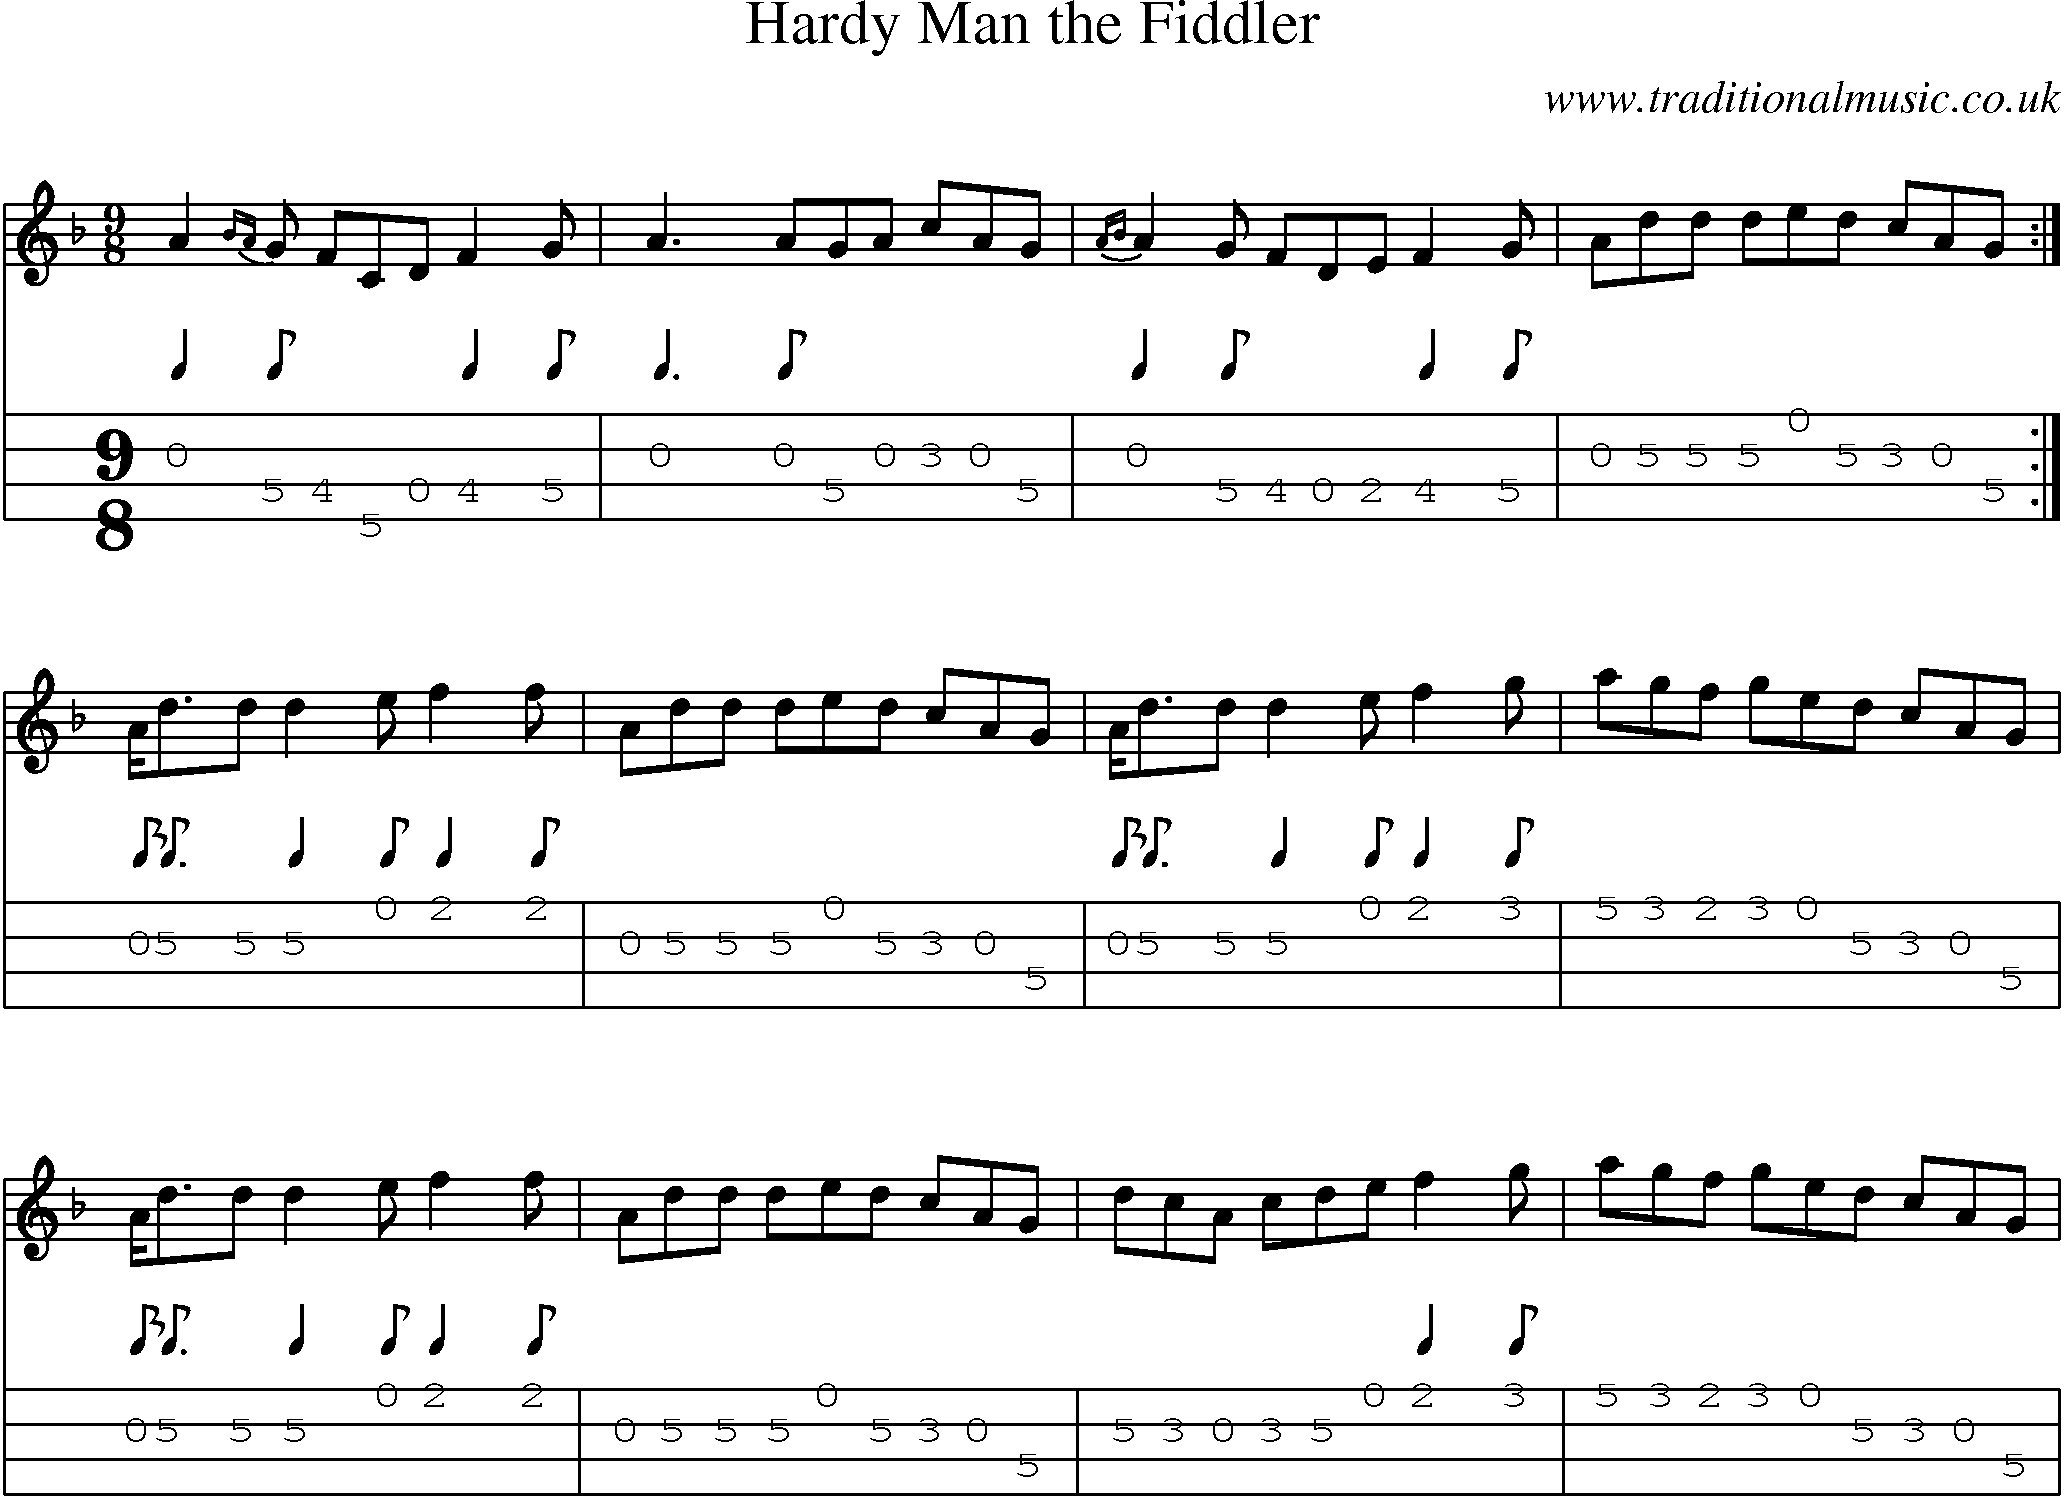 Music Score and Mandolin Tabs for Hardy Man Fiddler